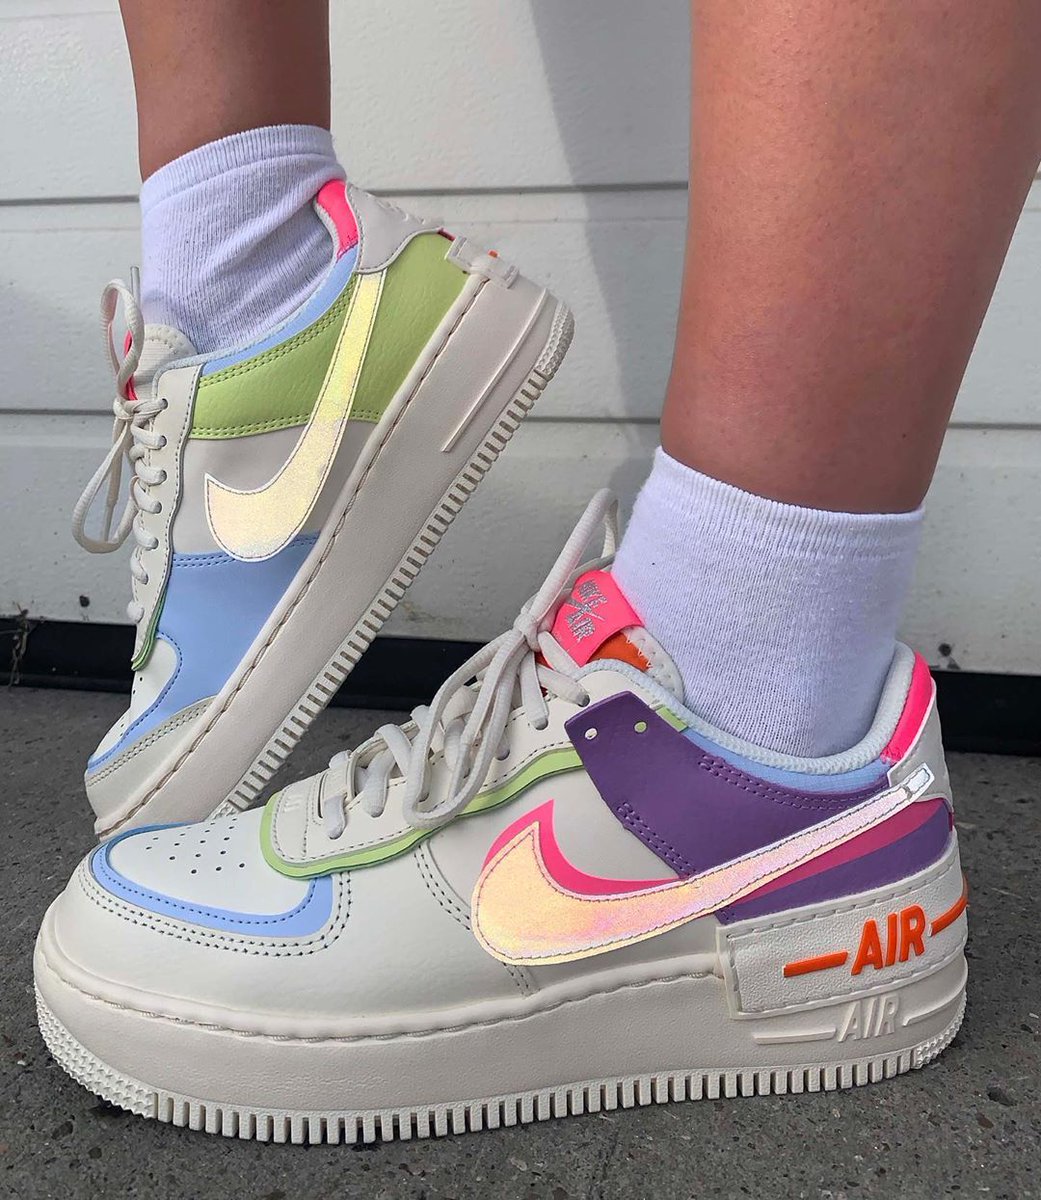 nike air force 1 shadow pale ivory stockx